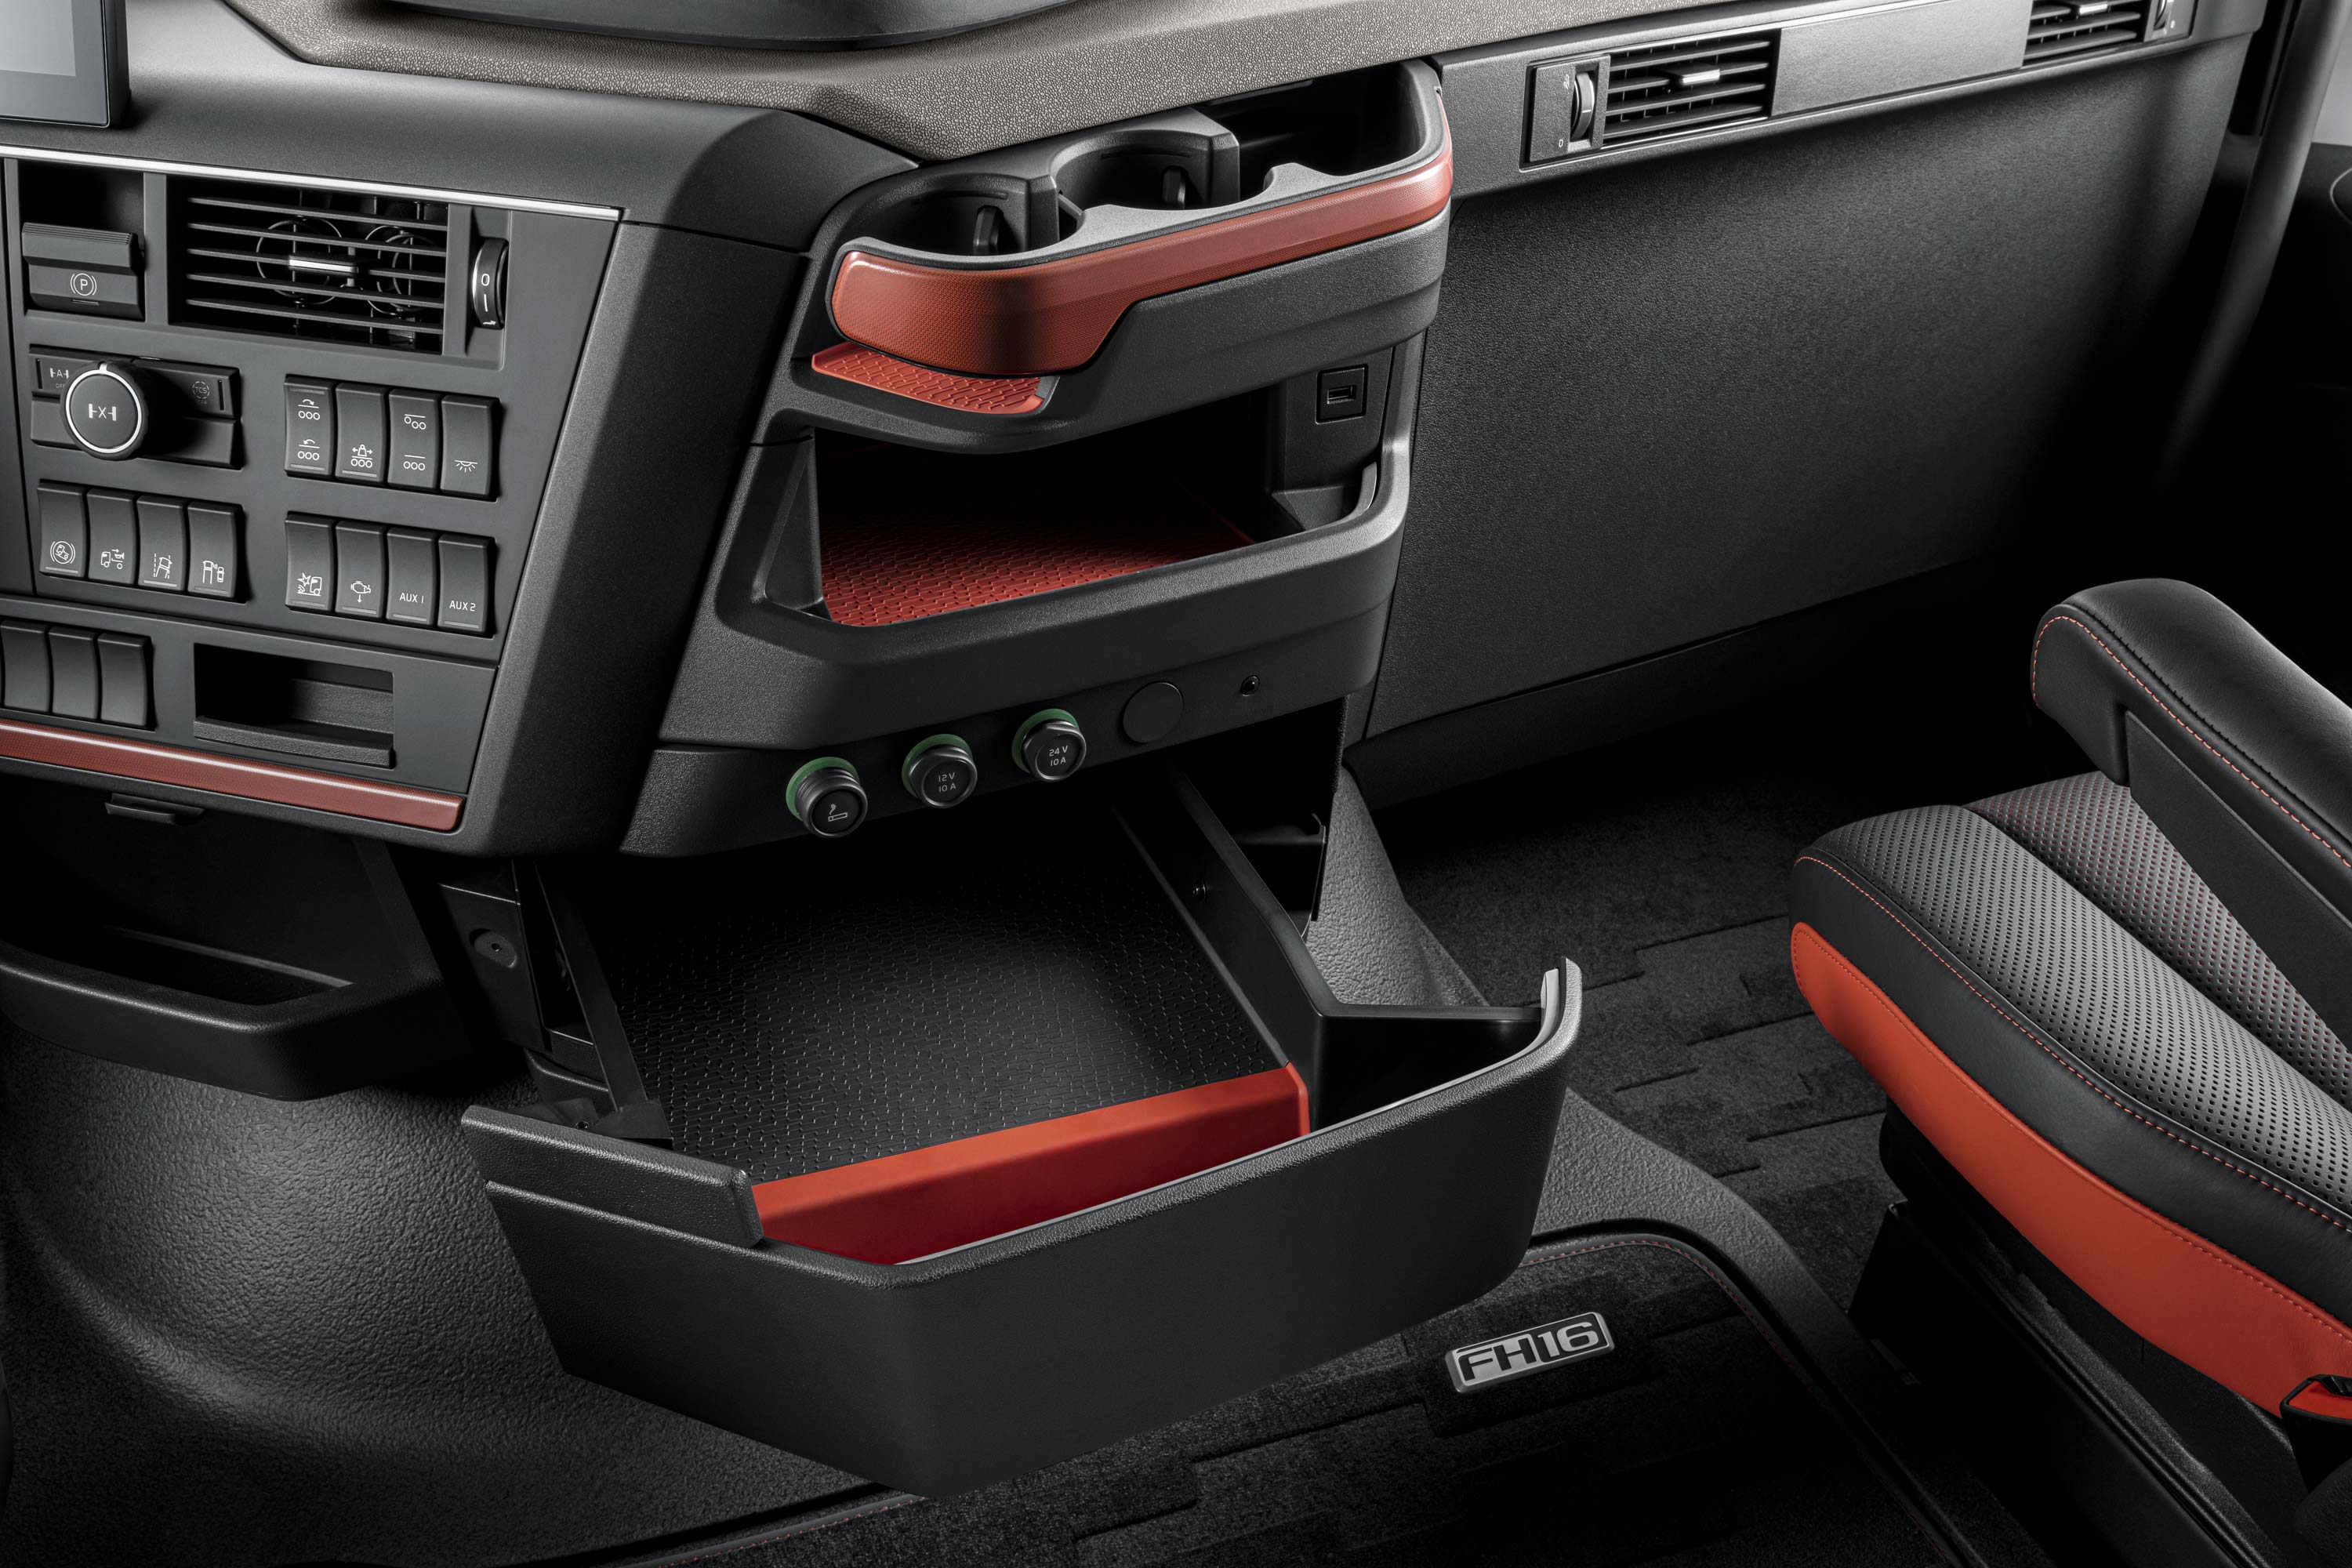 Convenient storages accessible from the Volvo FH16 driver seat.